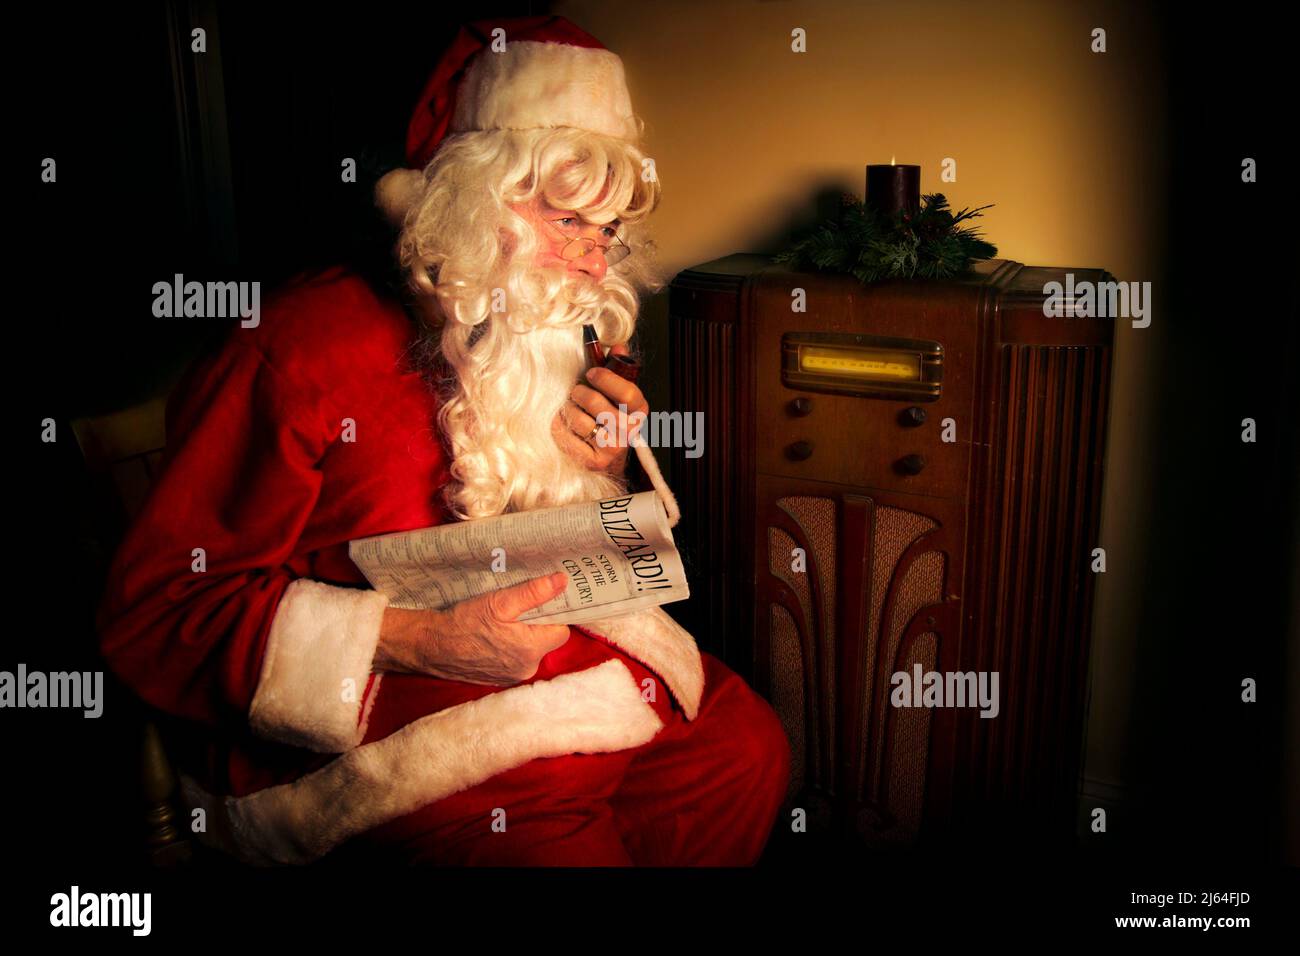 Santa Claus listening to an old fashioned radio for the weather report. He is holding a newspaper that says 'blizzard'. Stock Photo